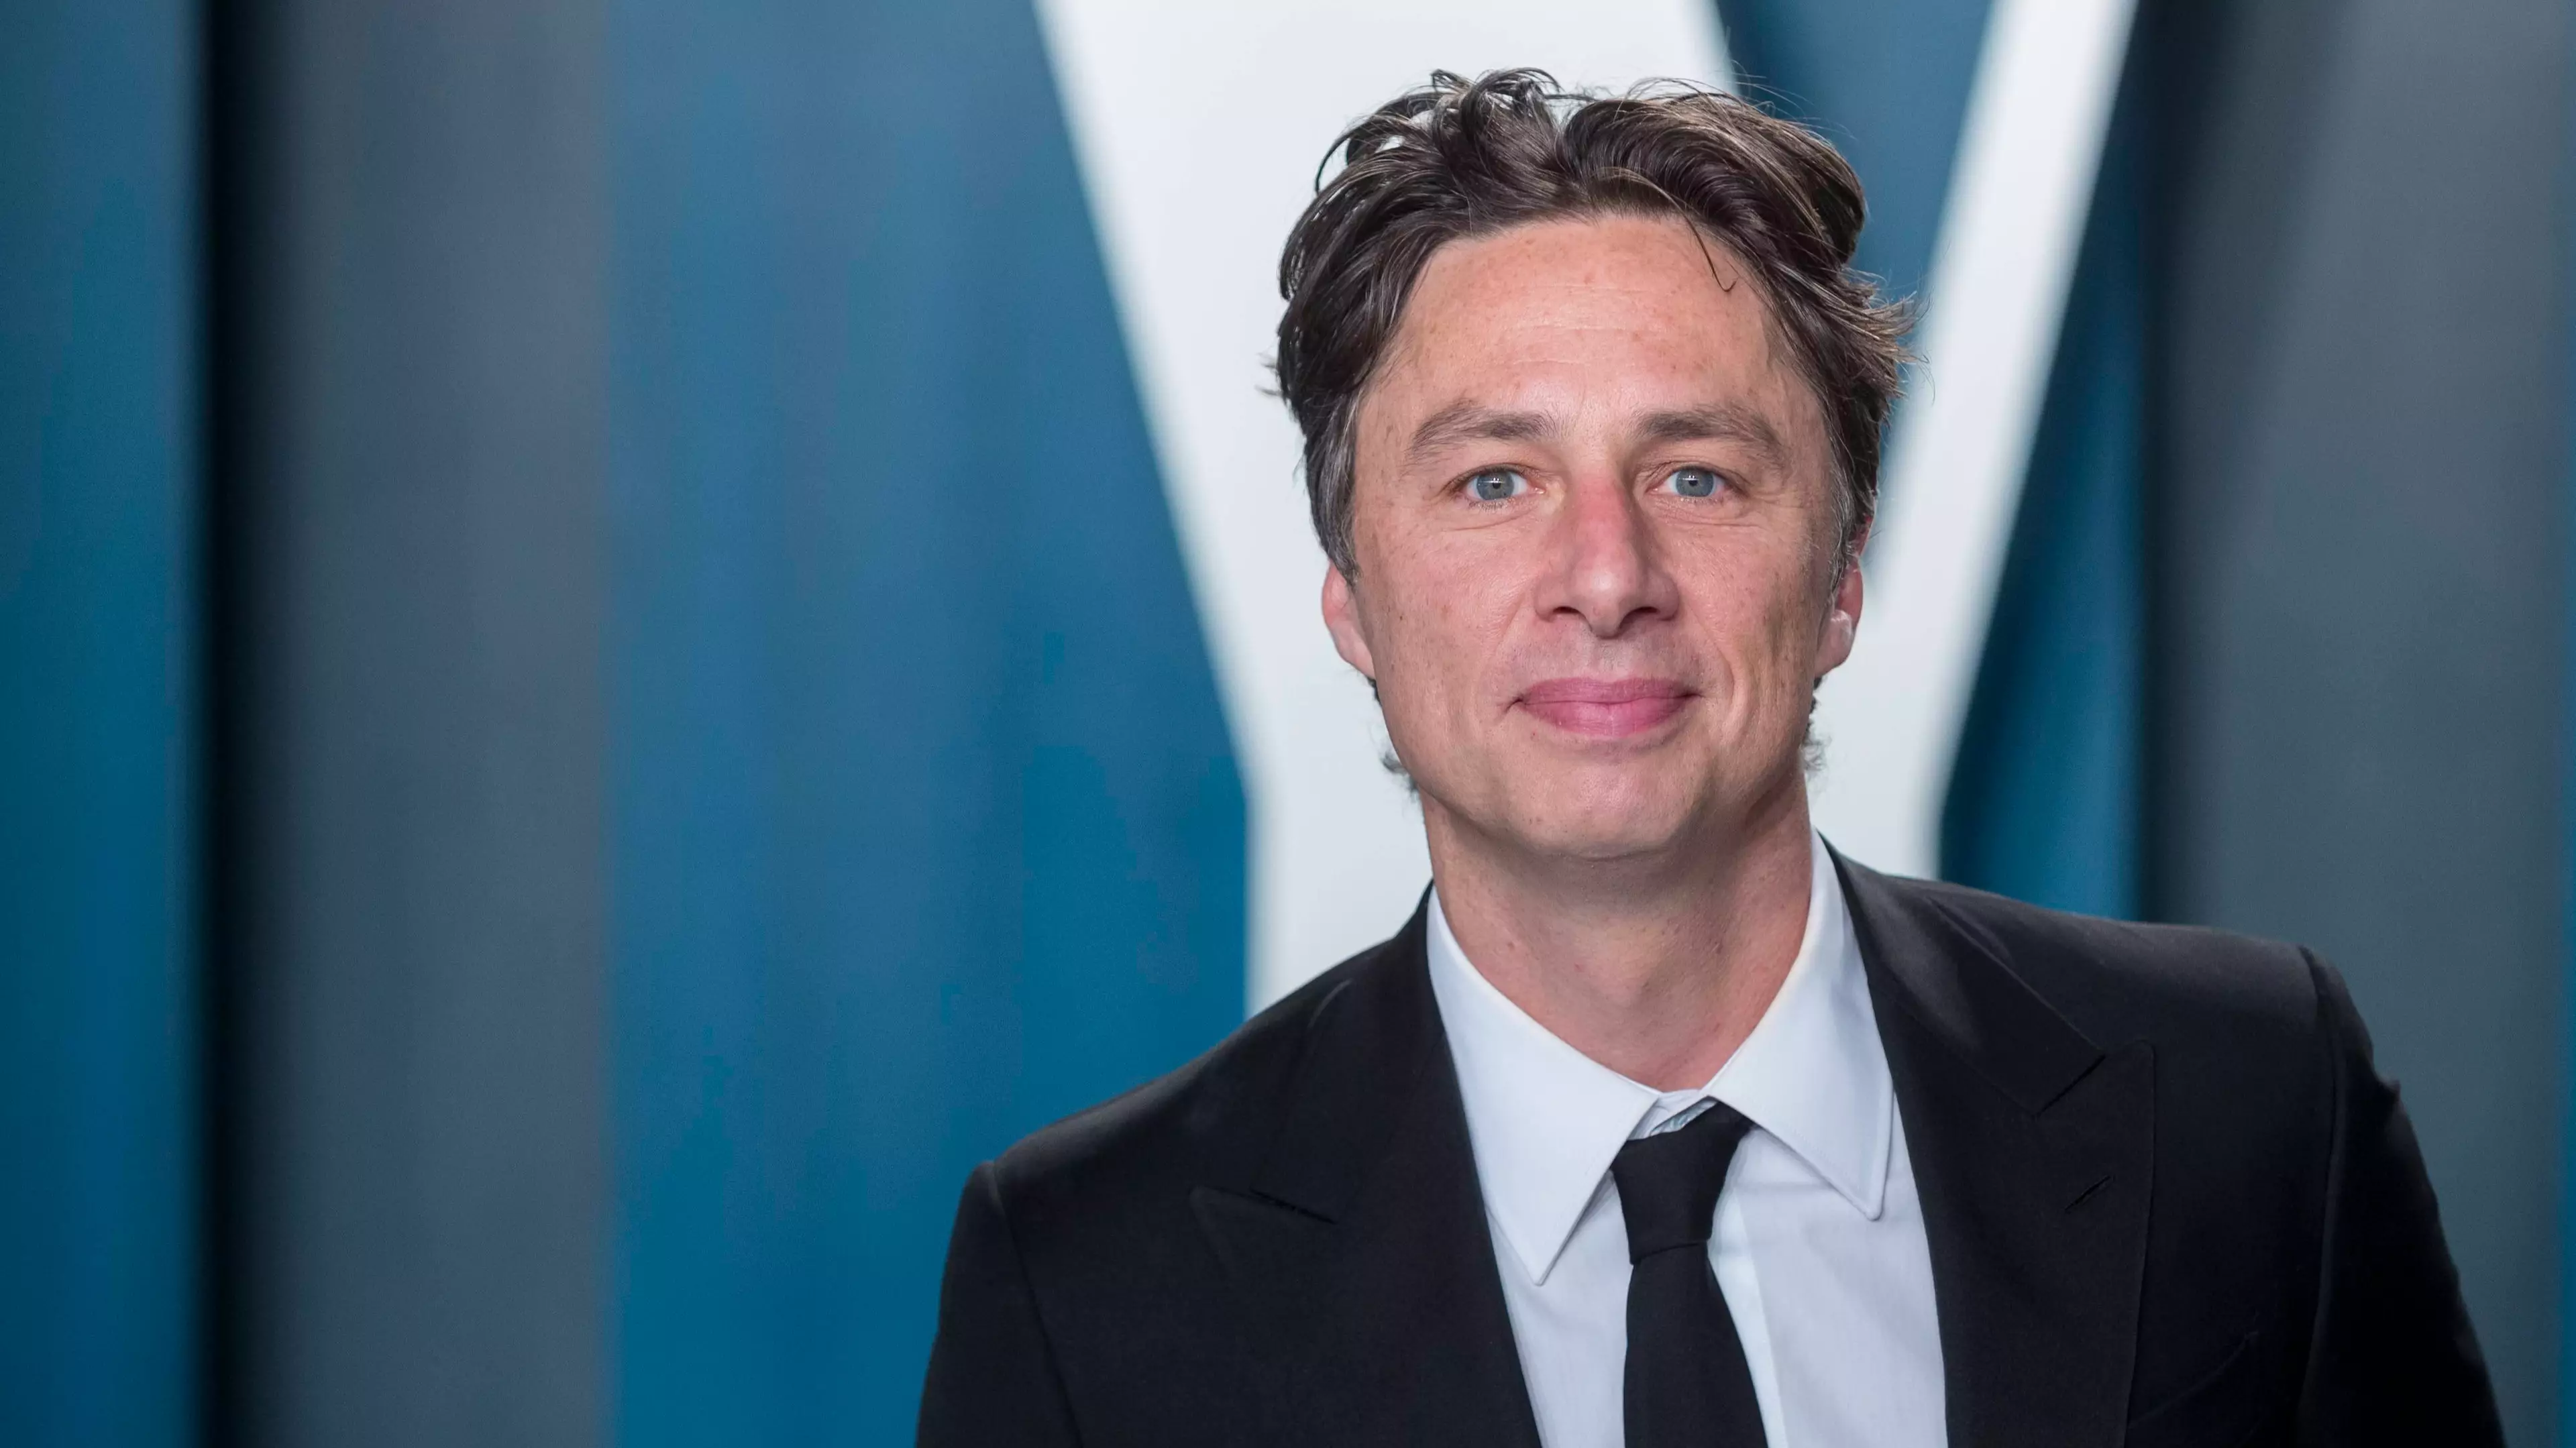 Zach Braff Addresses Backlash To His Crowdfunded Movie Wish I Was Here